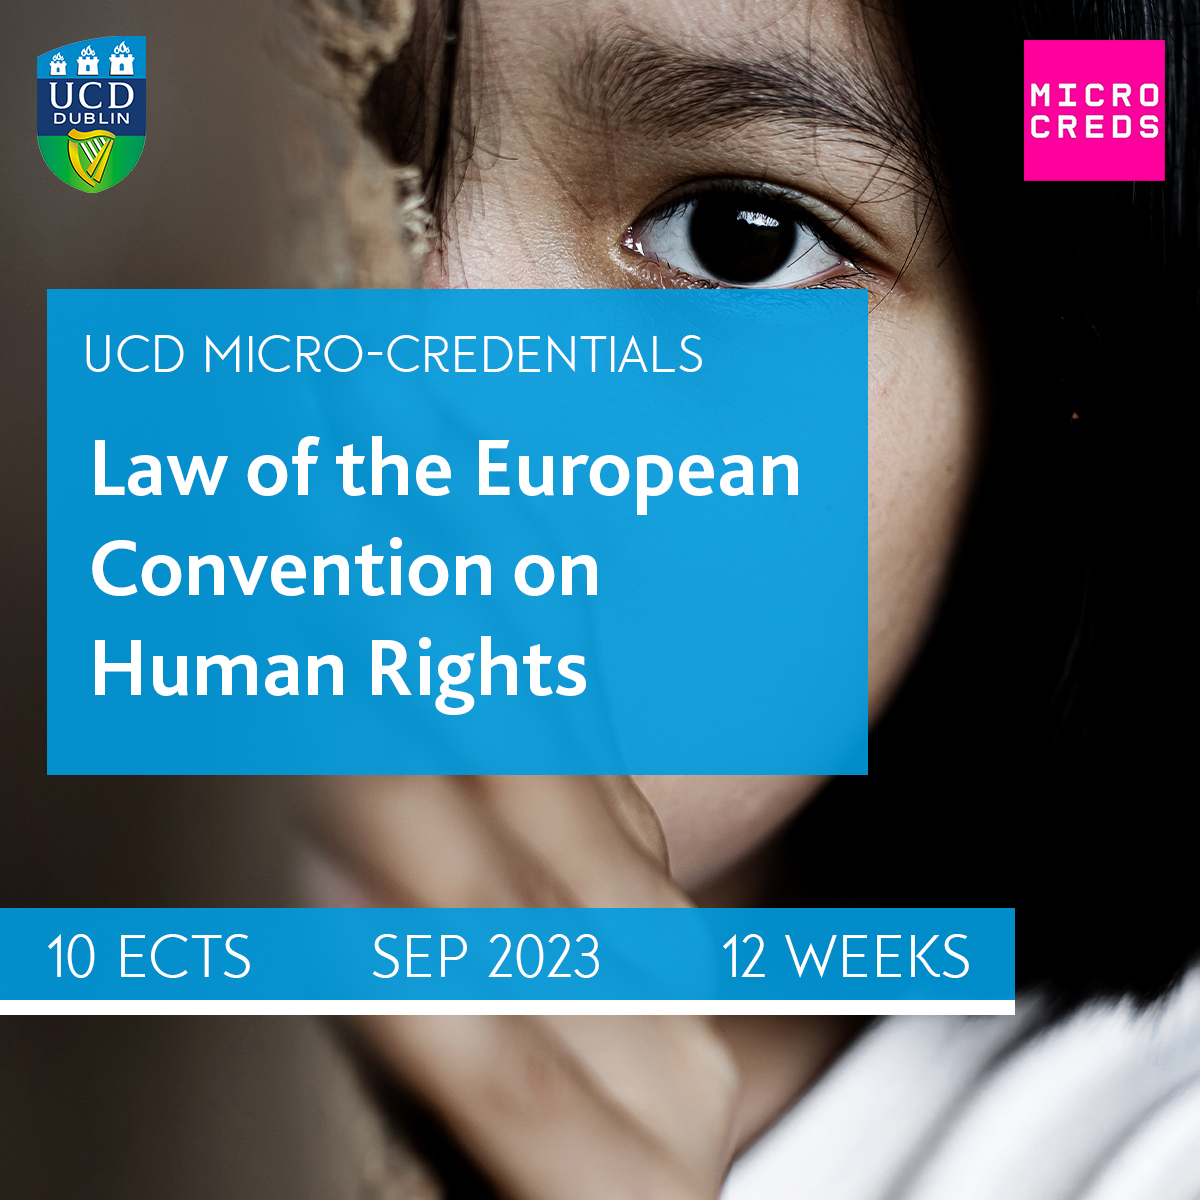 Enhance your understanding of European #HumanRights law with the Law of the European Convention on Human Rights #microcredential from the UCD Sutherland School of Law.

Join us in September 2023; ucd.ie/microcredentia…

#HumanRightsLaw #microcredential #SDG16 #UCD